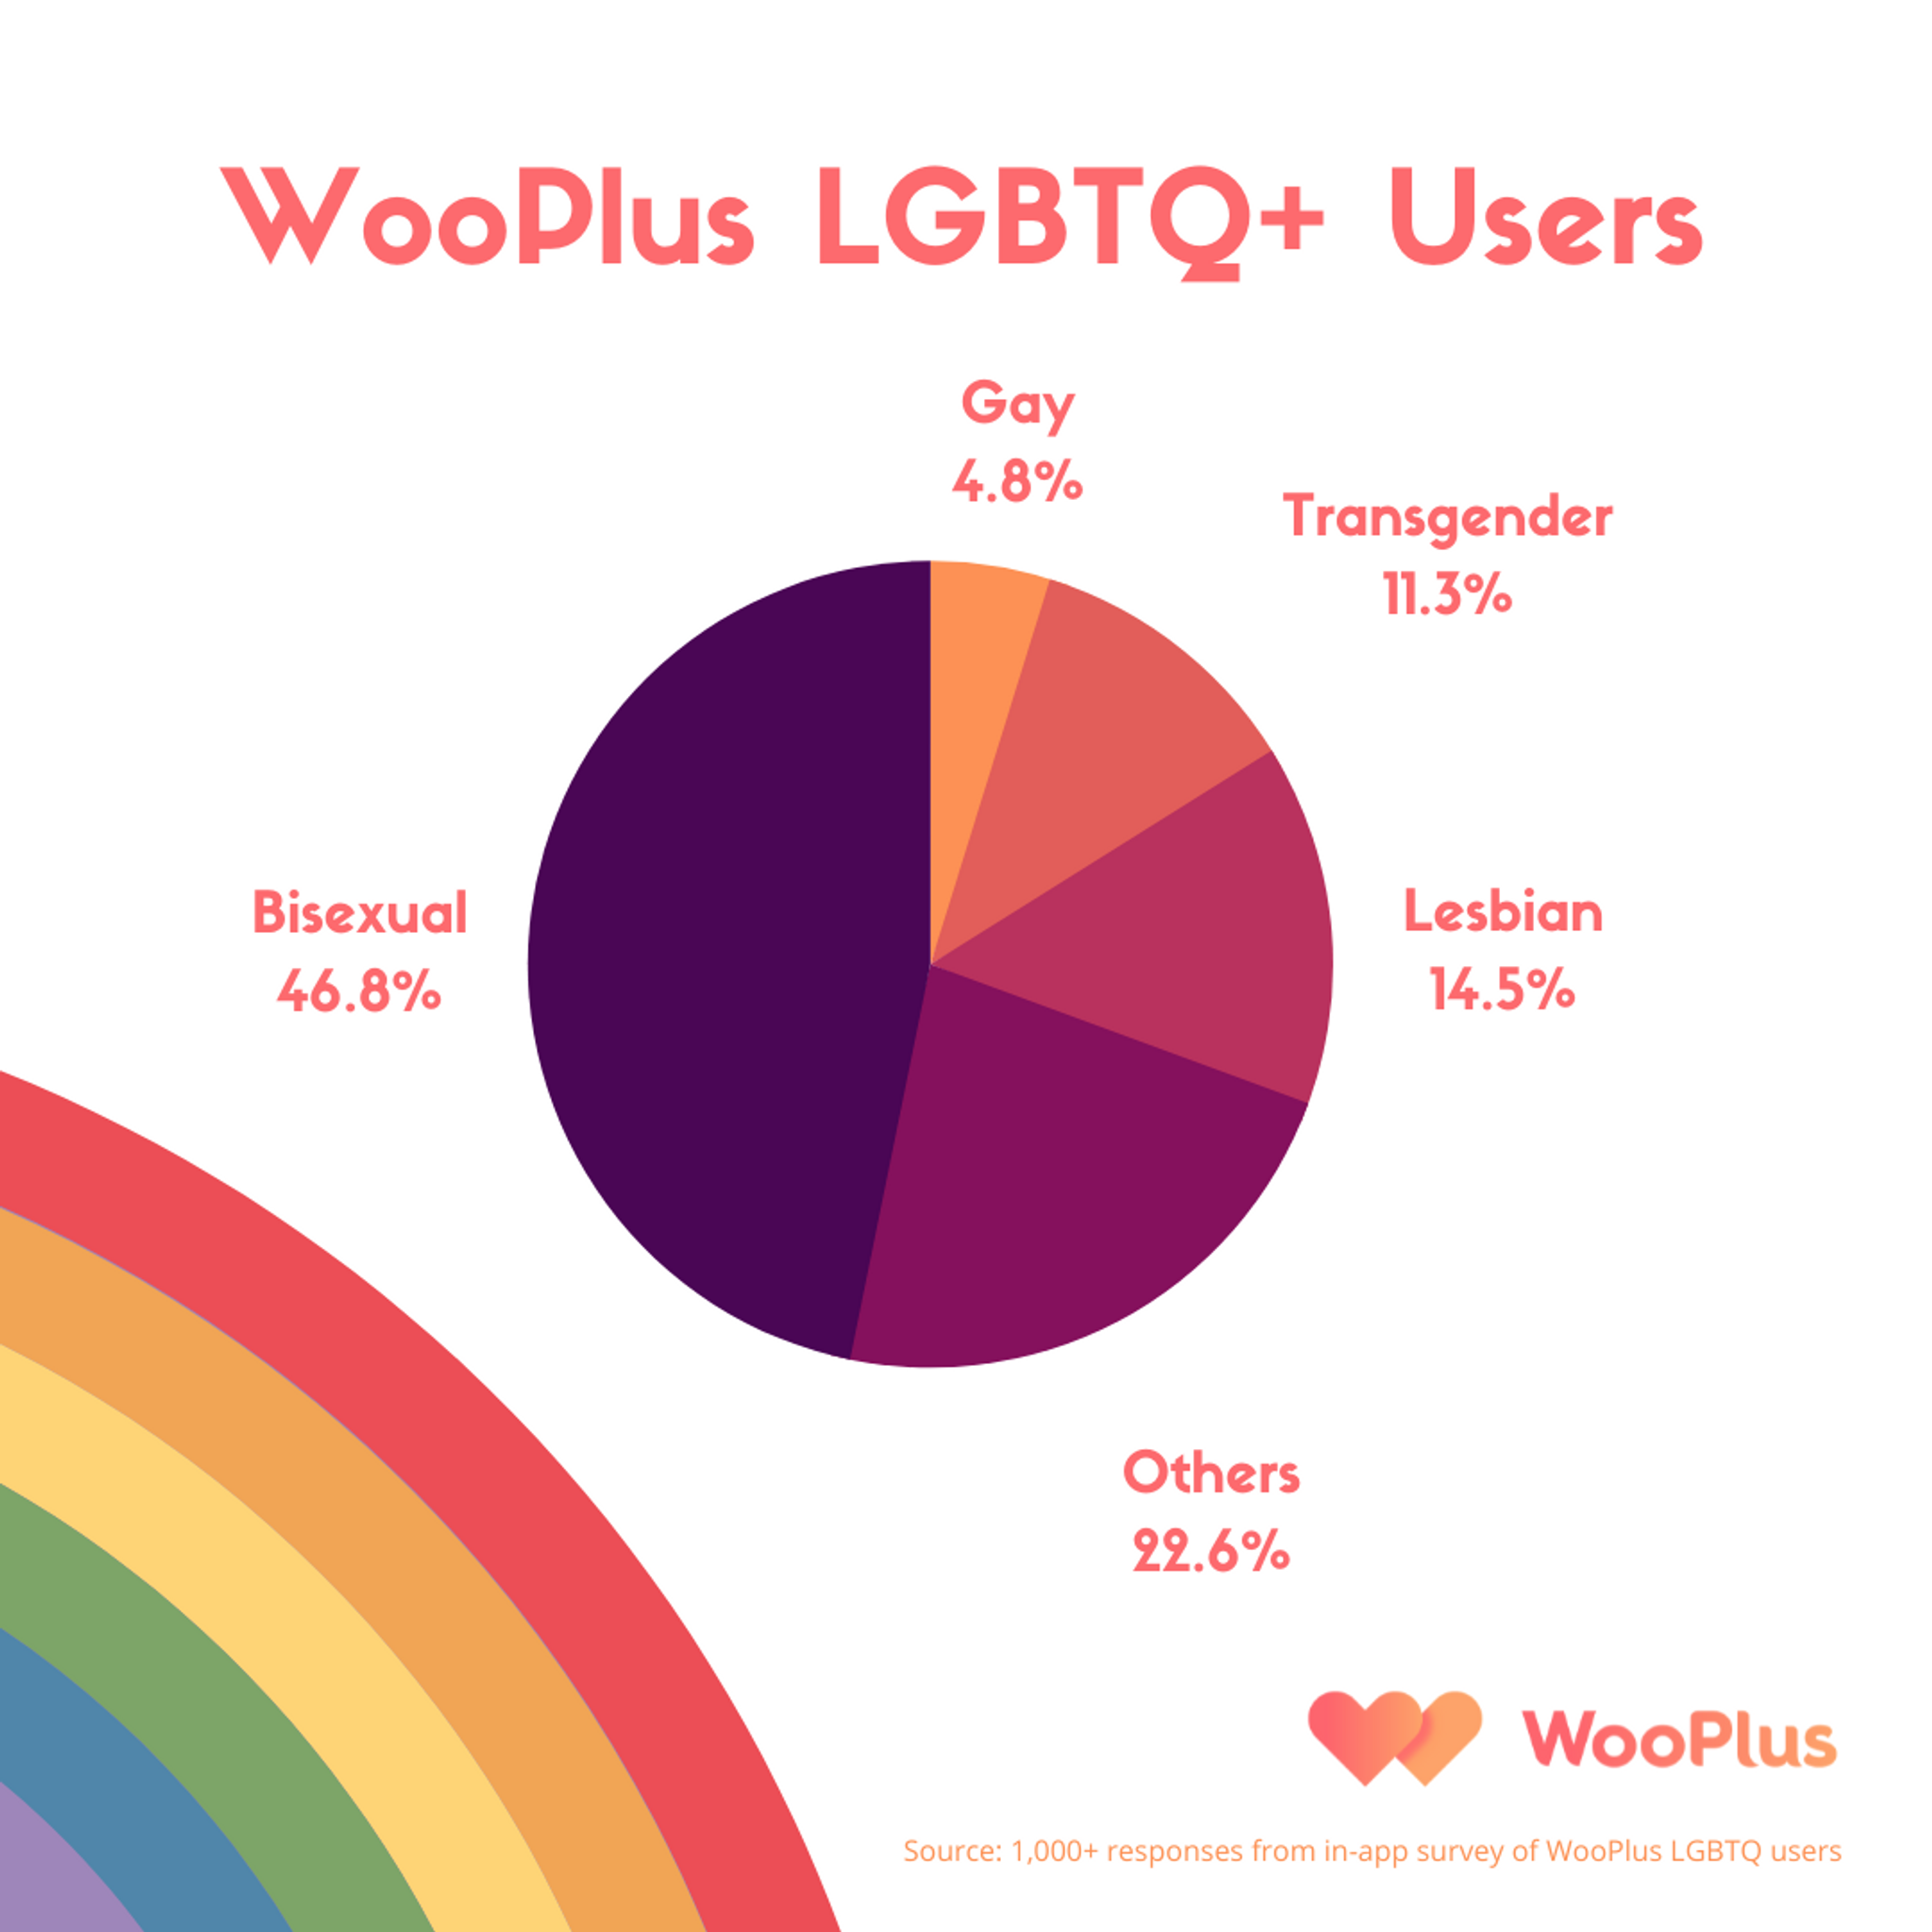 WooPlus, the largest curvy dating app provides most inclusive platform for bisexual